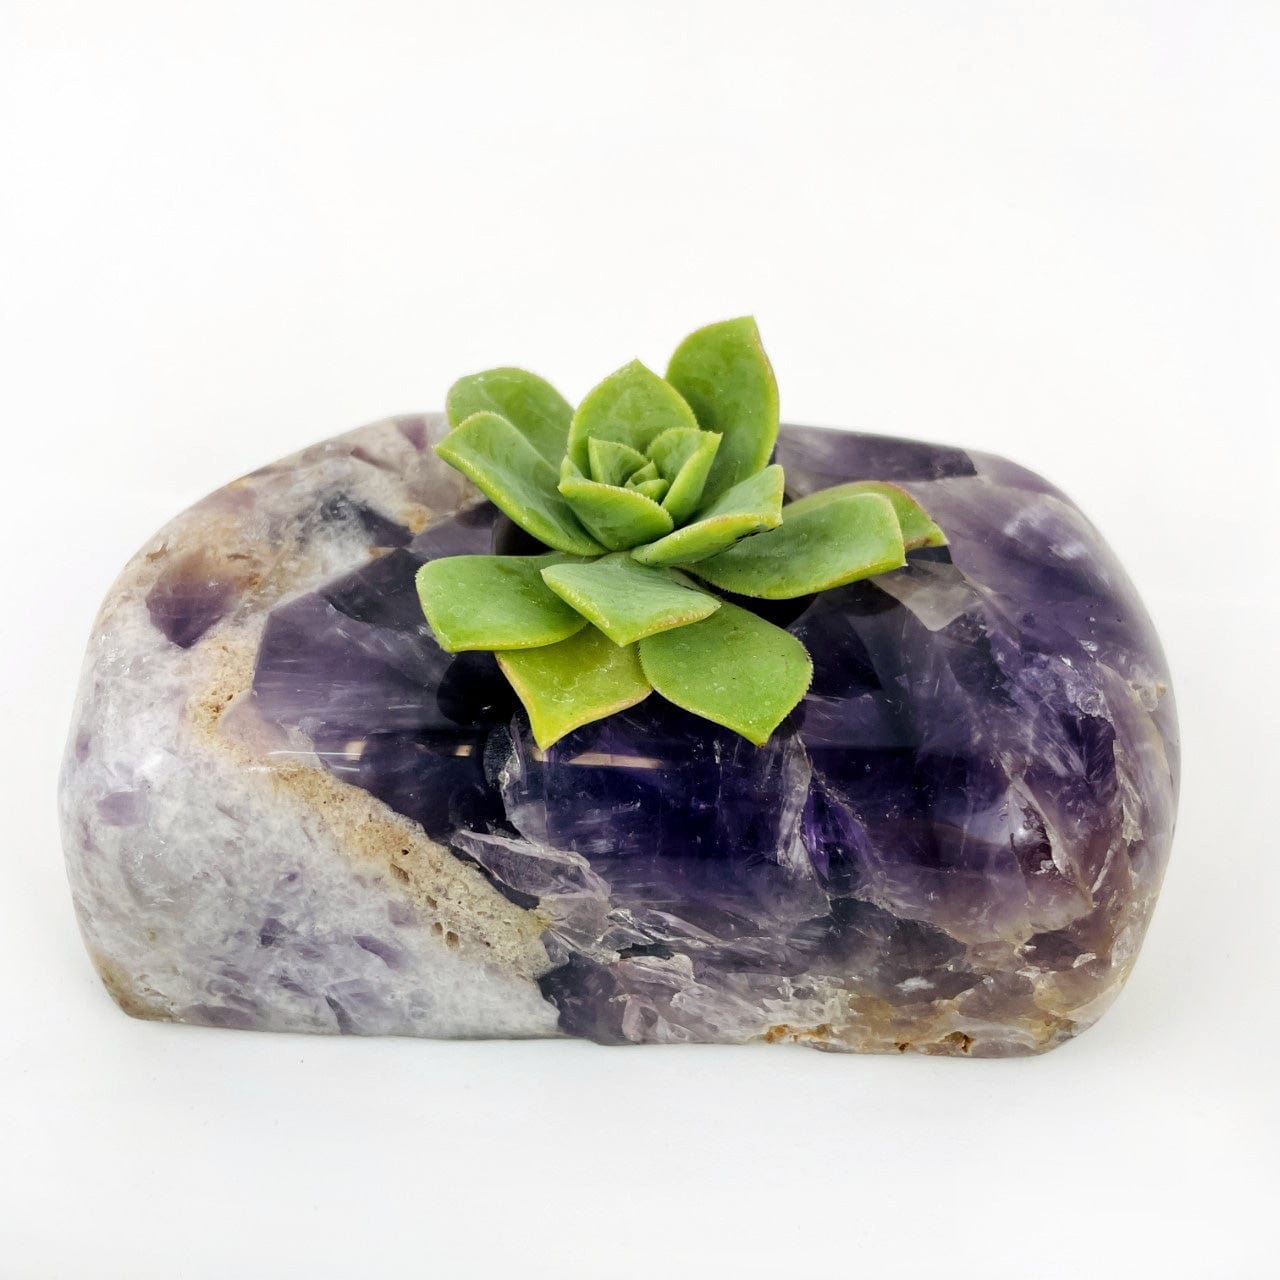 Chevron Amethyst Polished Candle Holder with a succulent in it